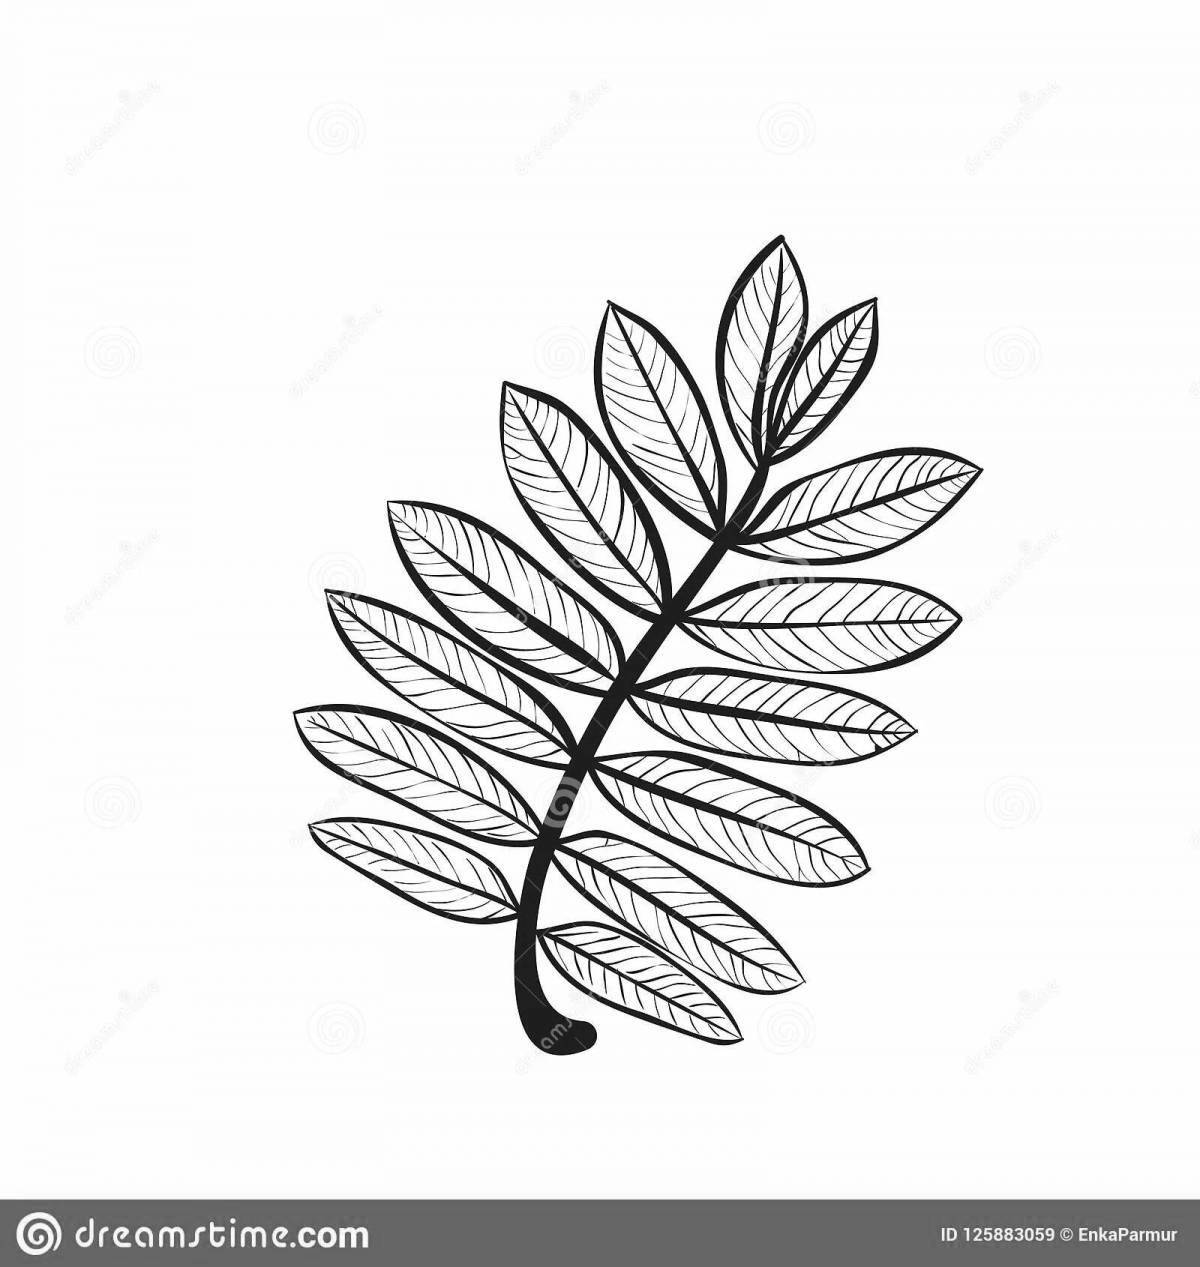 Adorable rowan leaf coloring page